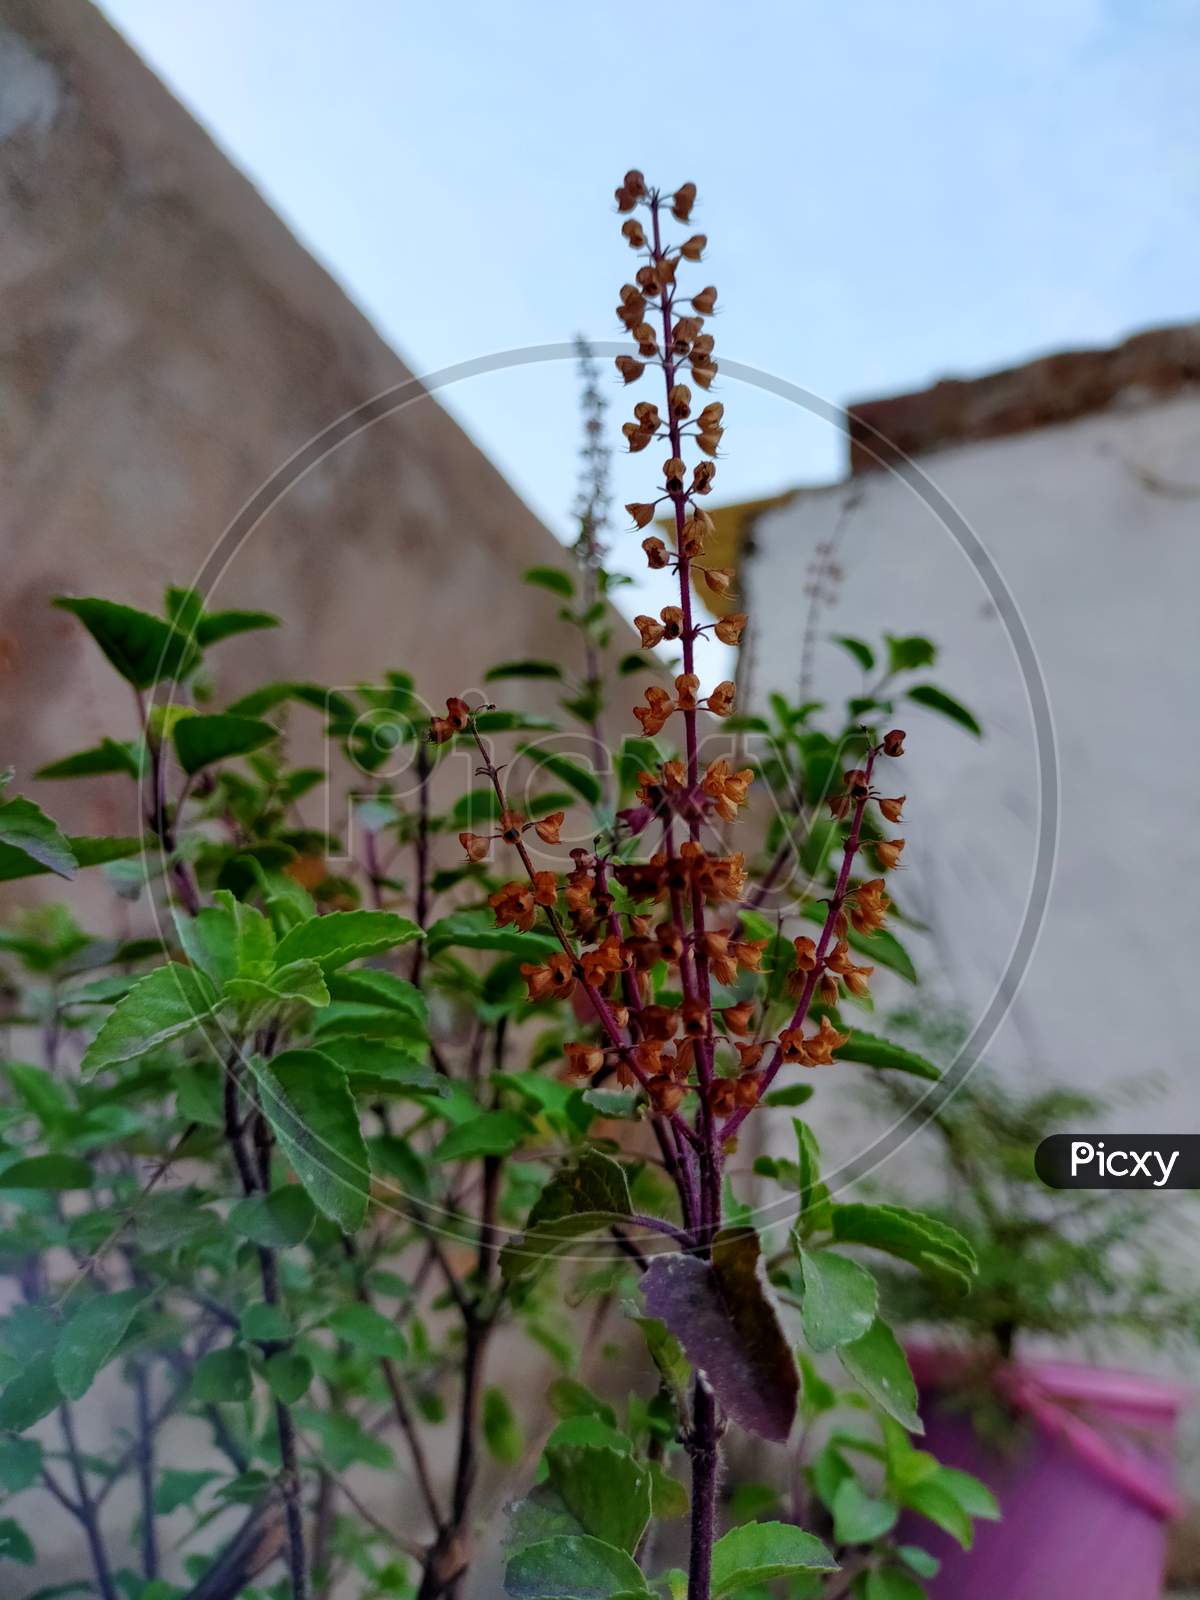 Tulsi plants flowers and leaves, a very sacred tree